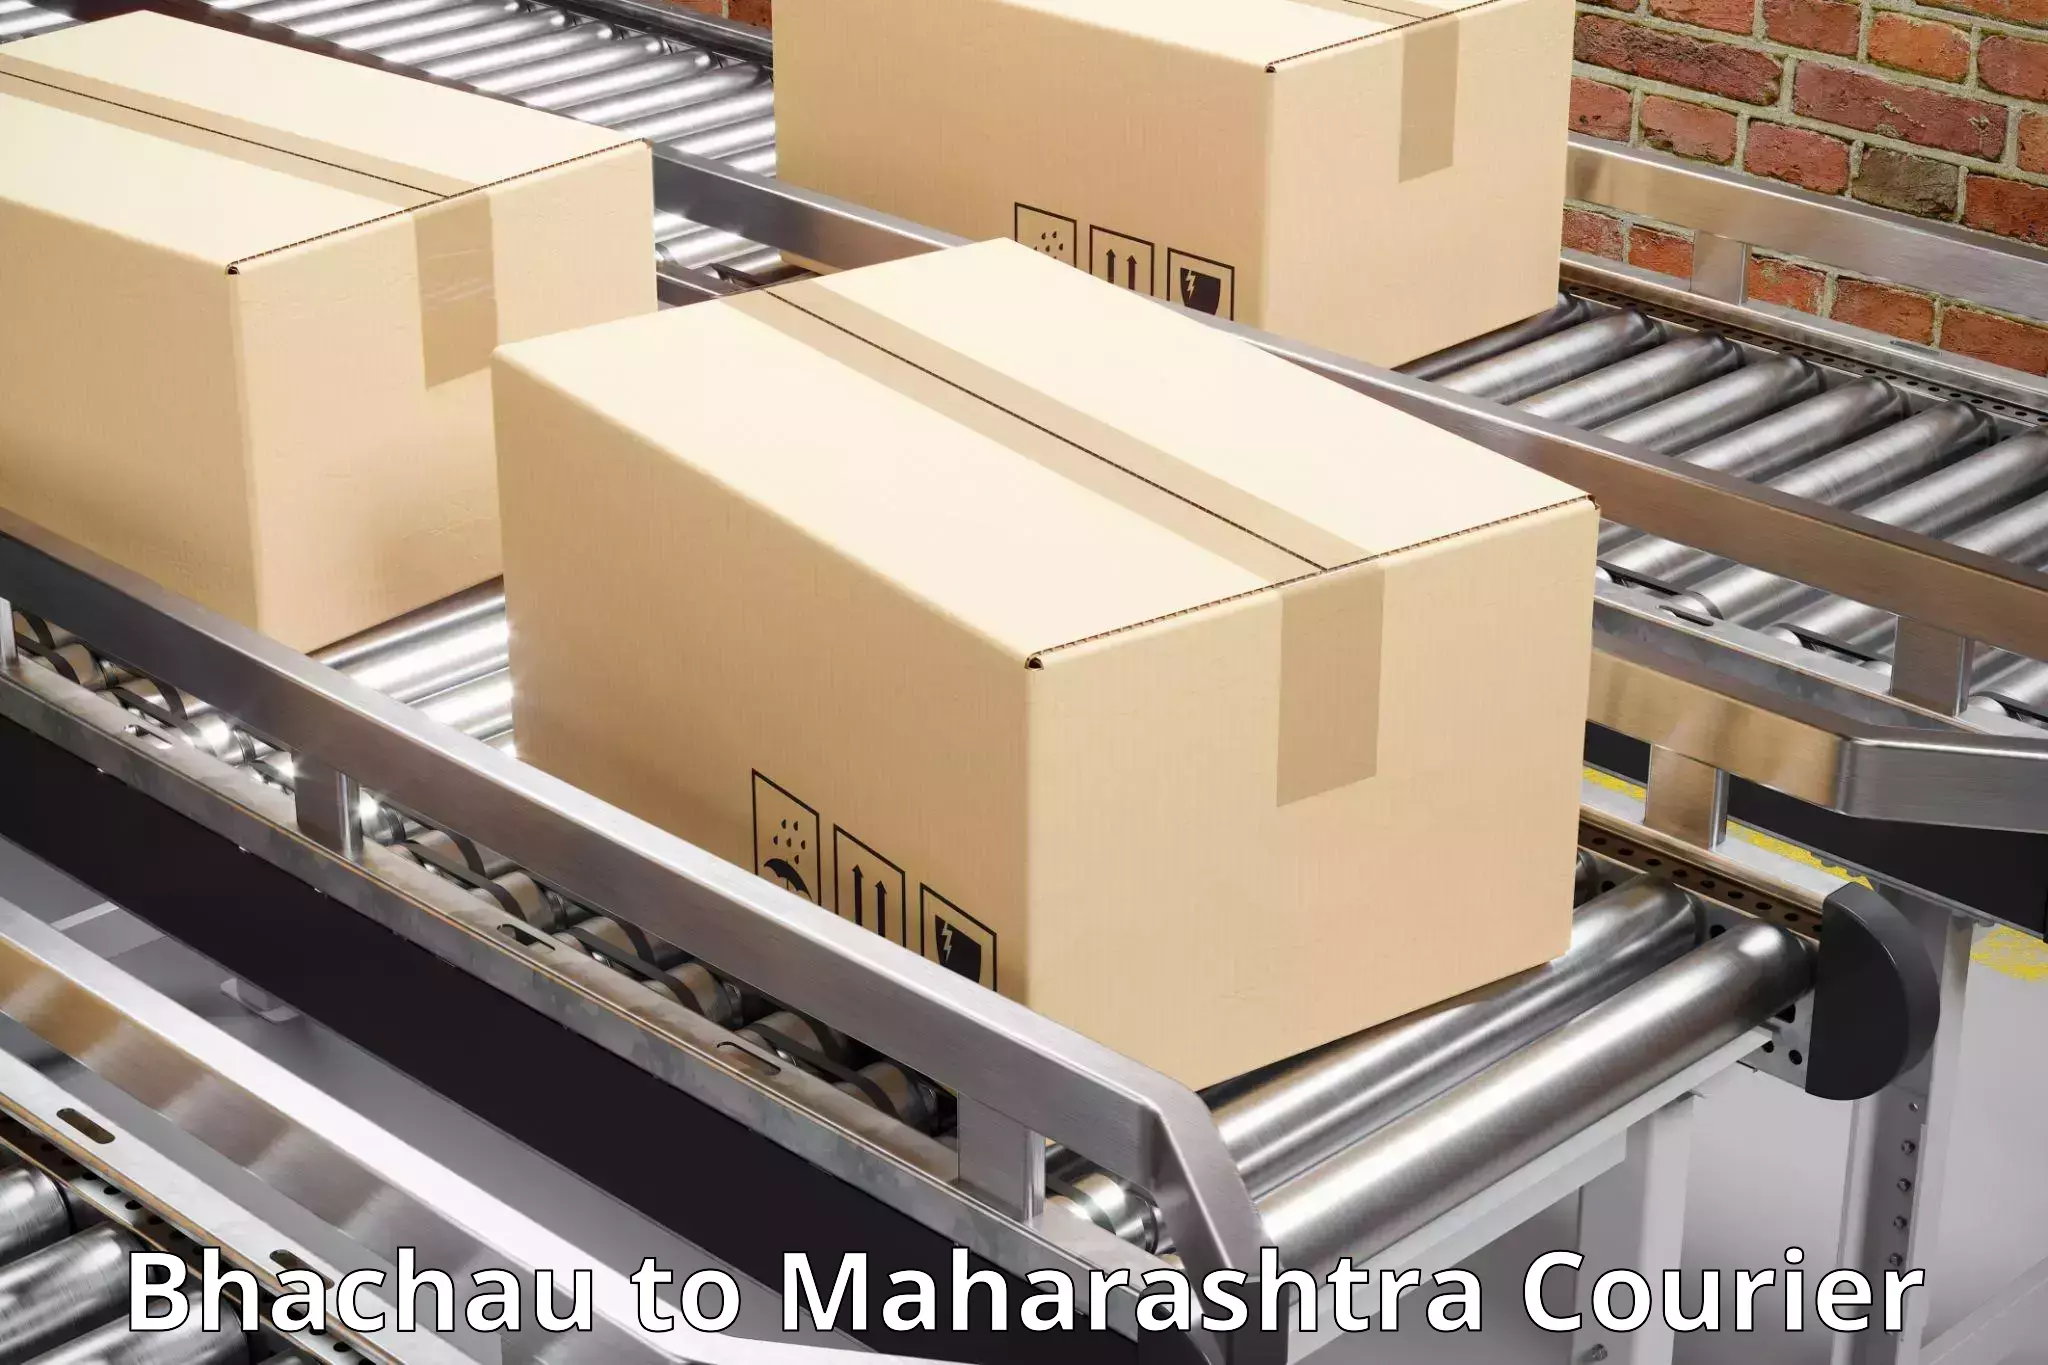 On-call courier service Bhachau to Shirdi